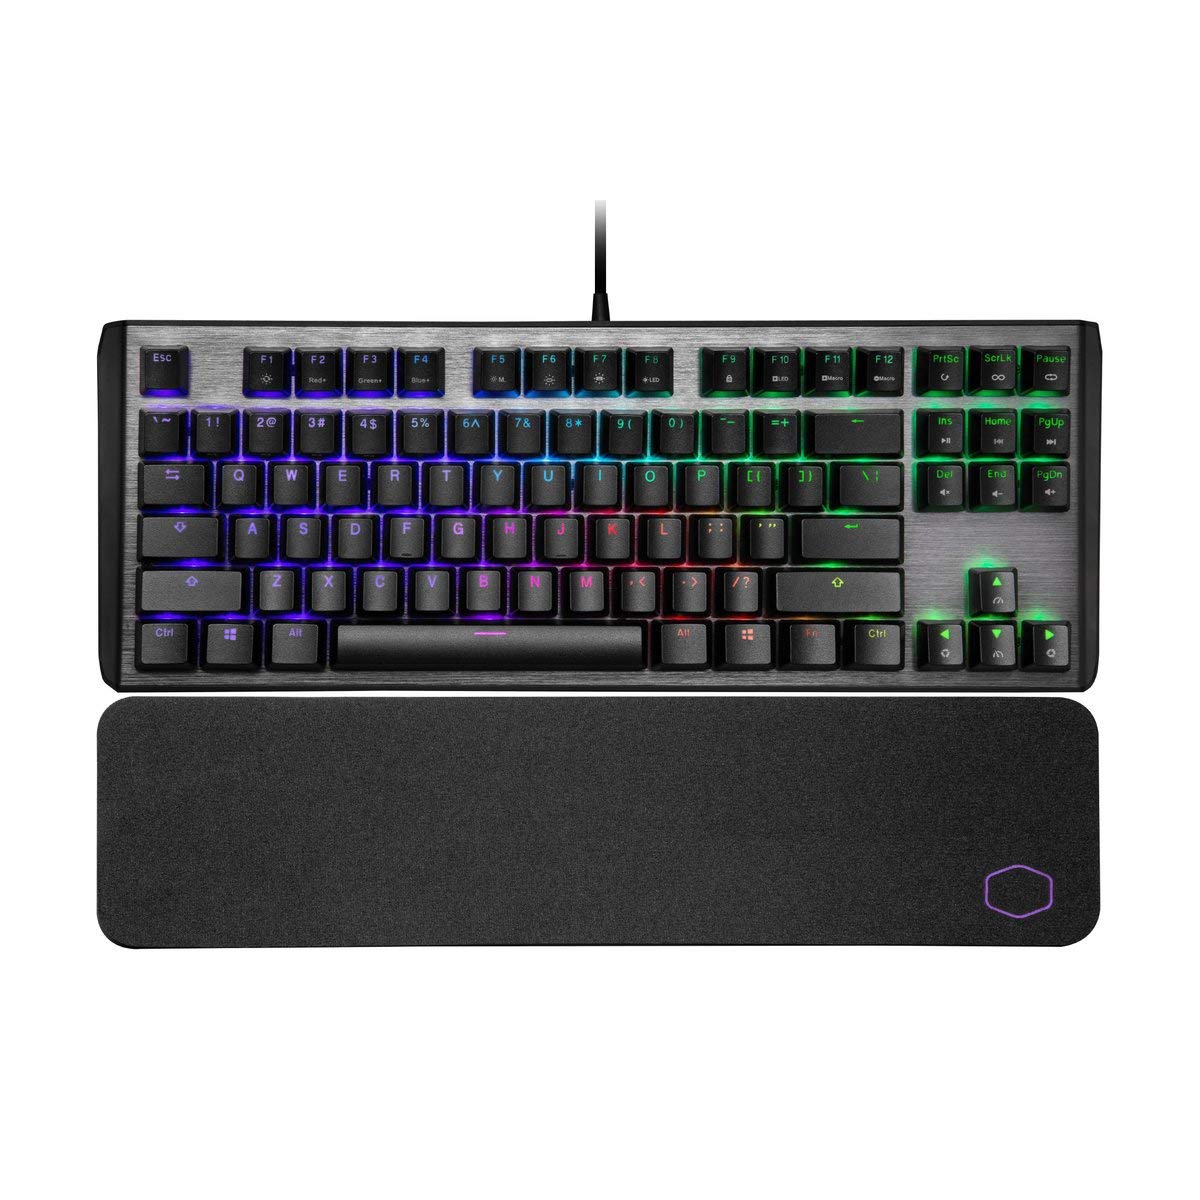 Cooler Master CK530 V2 Tenkeyless Gaming Mechanical Keyboard Blue Switch with RGB Backlighting, On-The-Fly Controls, and Aluminum Top Plate